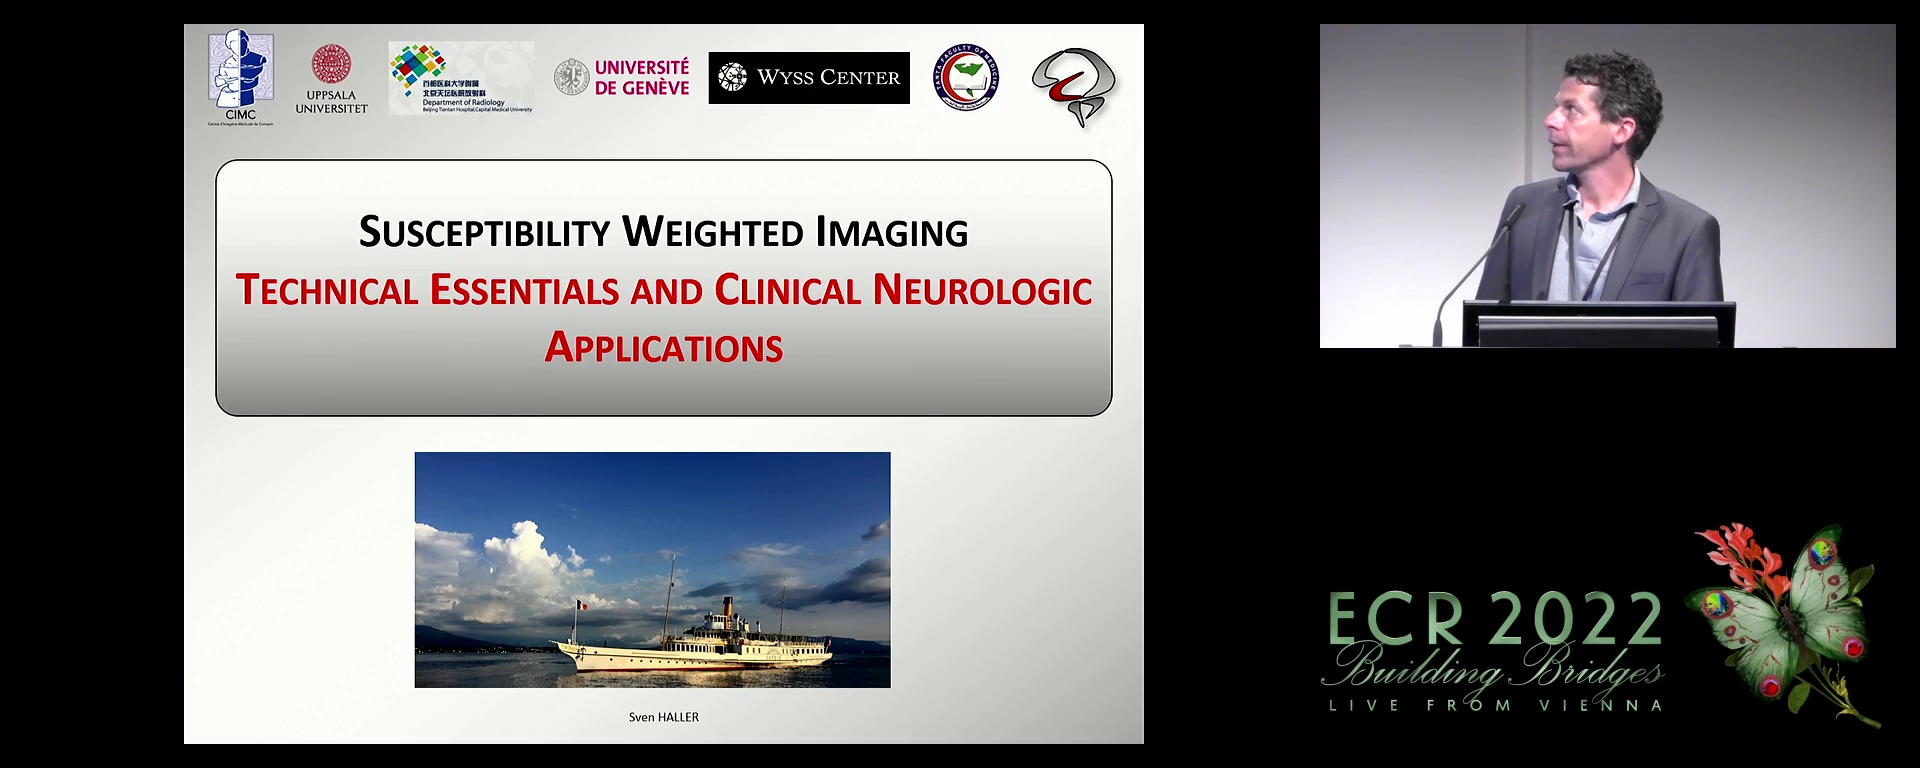 Susceptibility weighted imaging (SWI) - Sven Haller, Geneva / CH